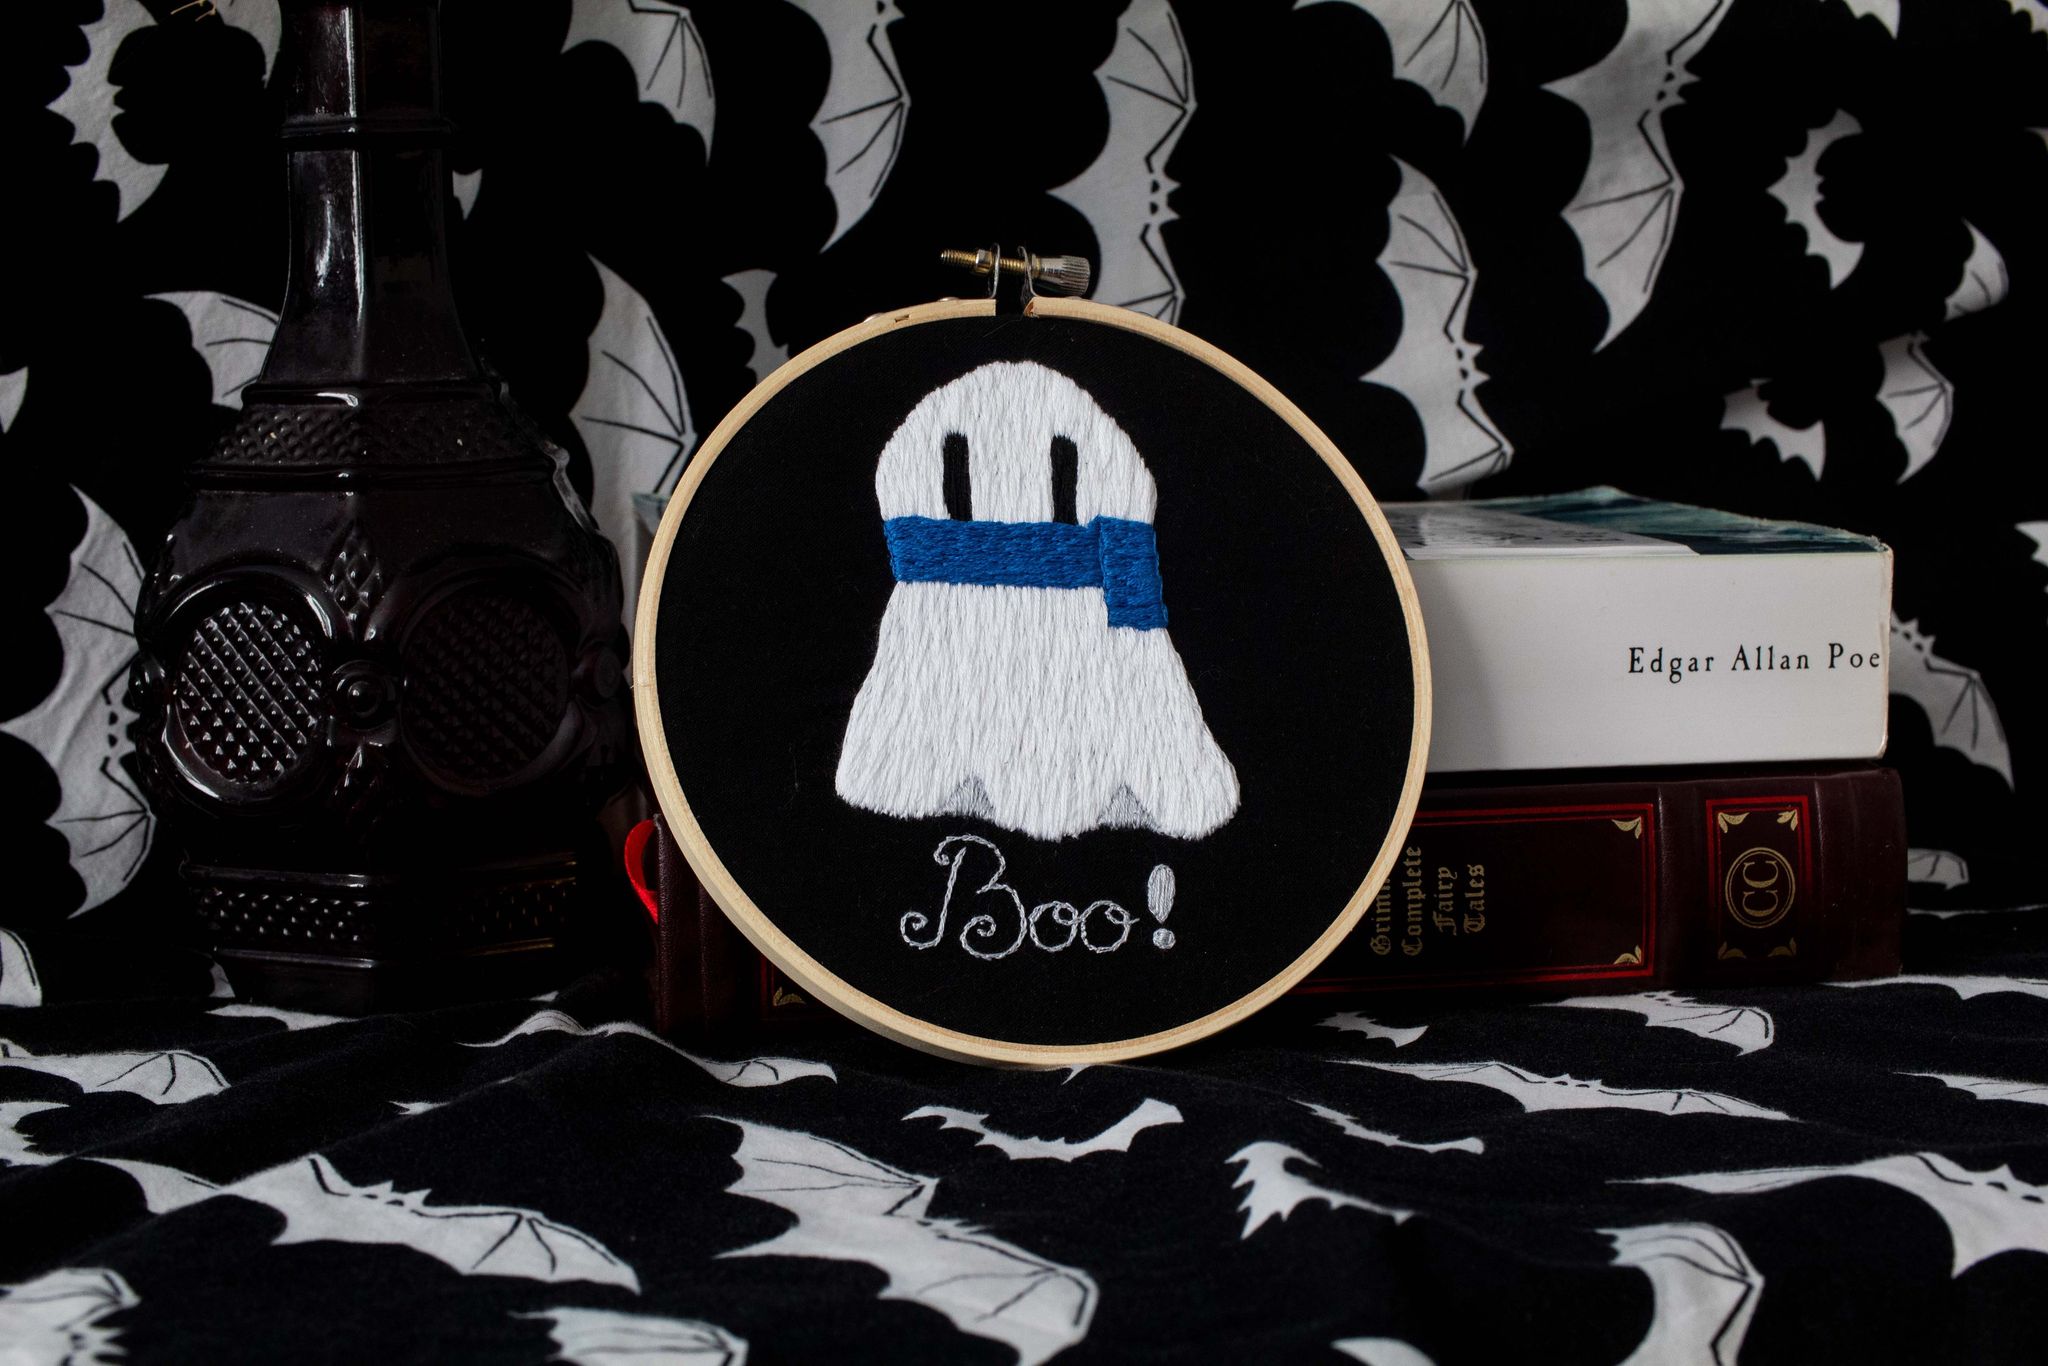 Product image of white embroidered ghost wearing a blue scarf on a black background with text "Boo!", set against a backdrop of old books and bats